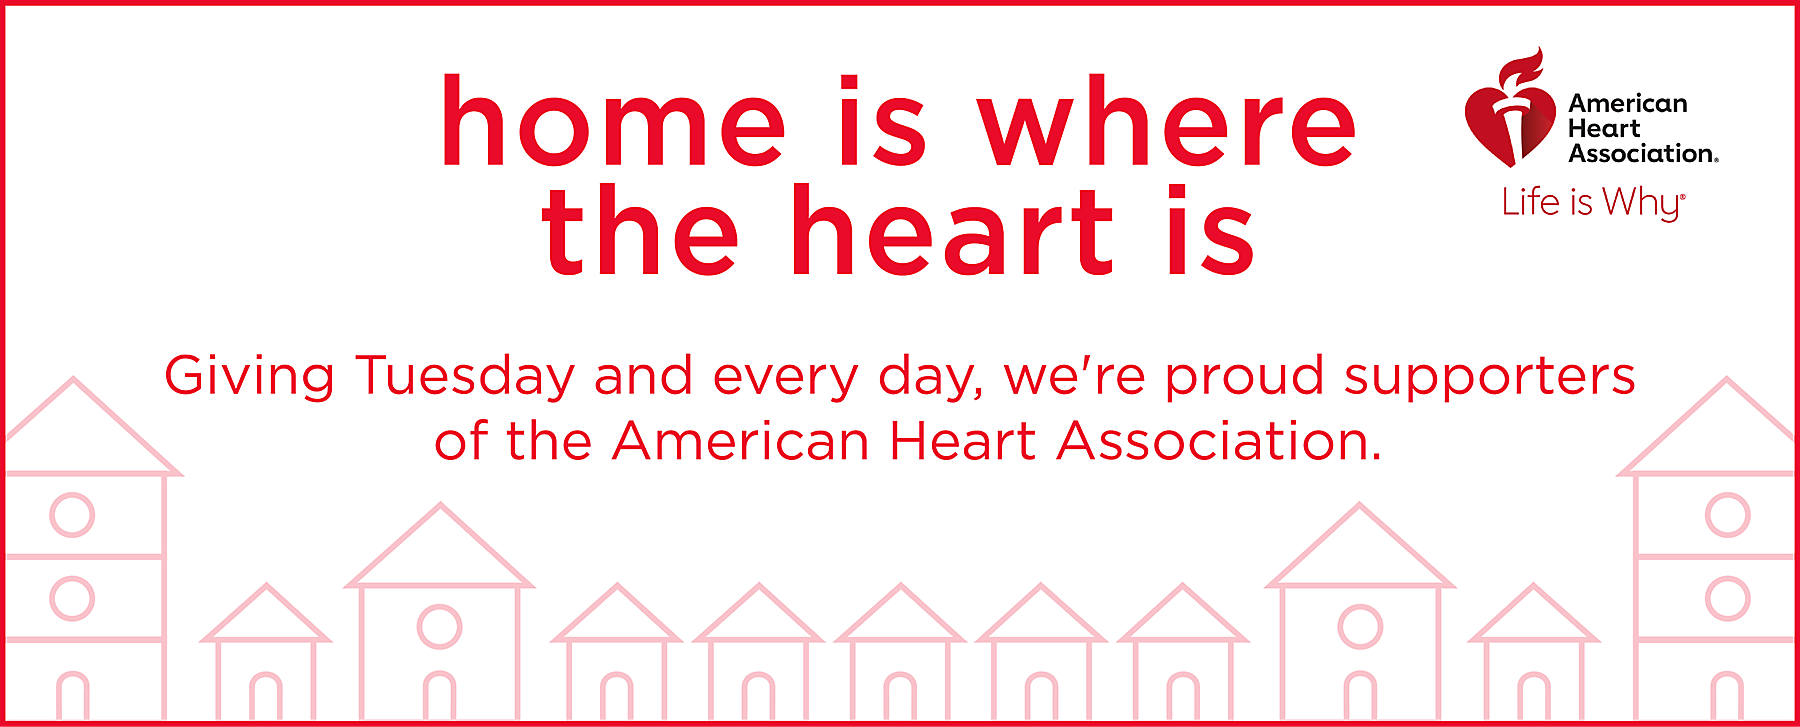 Home is where the heart is Giving Tuesday and every day, we're proud supporters of the American Heart Association. American Heart Association Life is Why